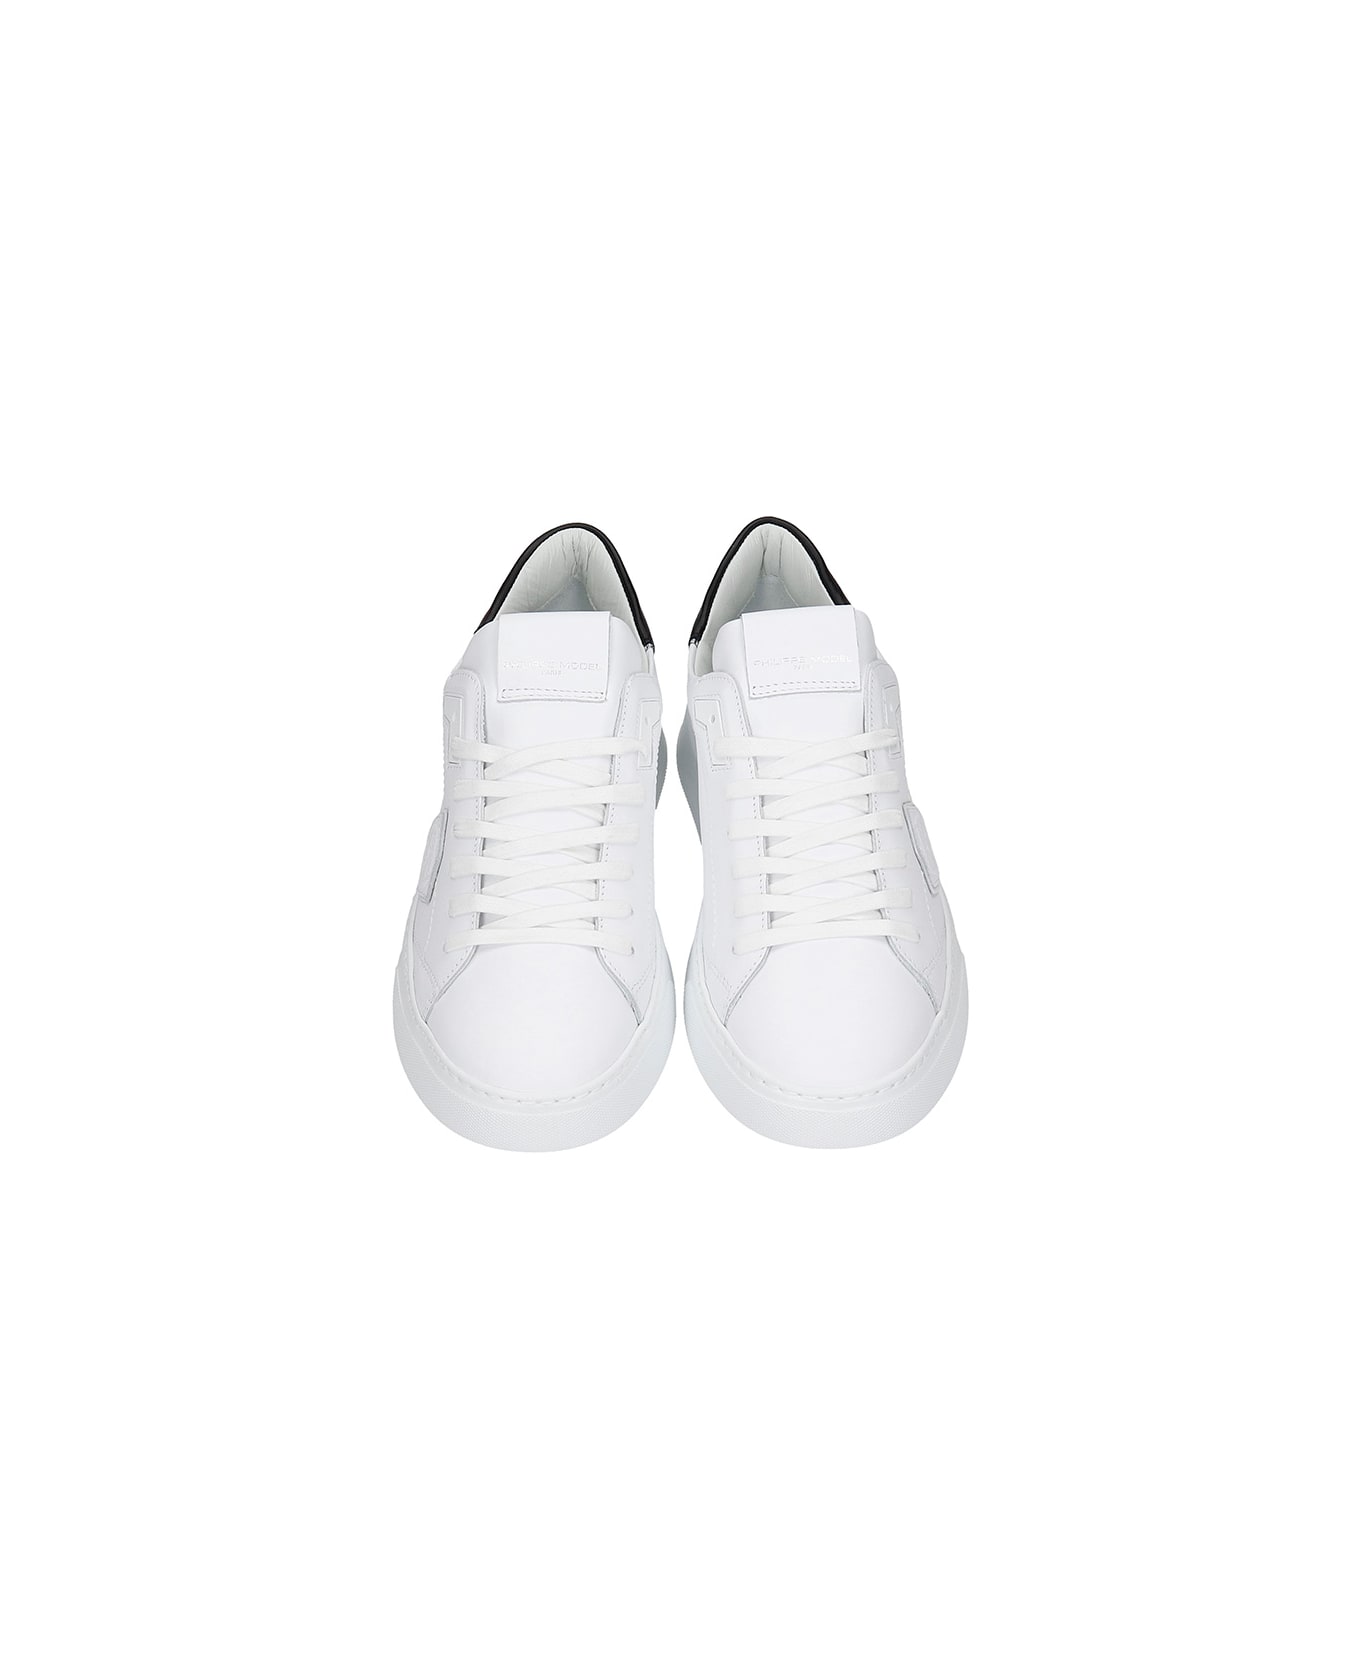 Philippe Model Temple L Sneakers In White Leather スニーカー